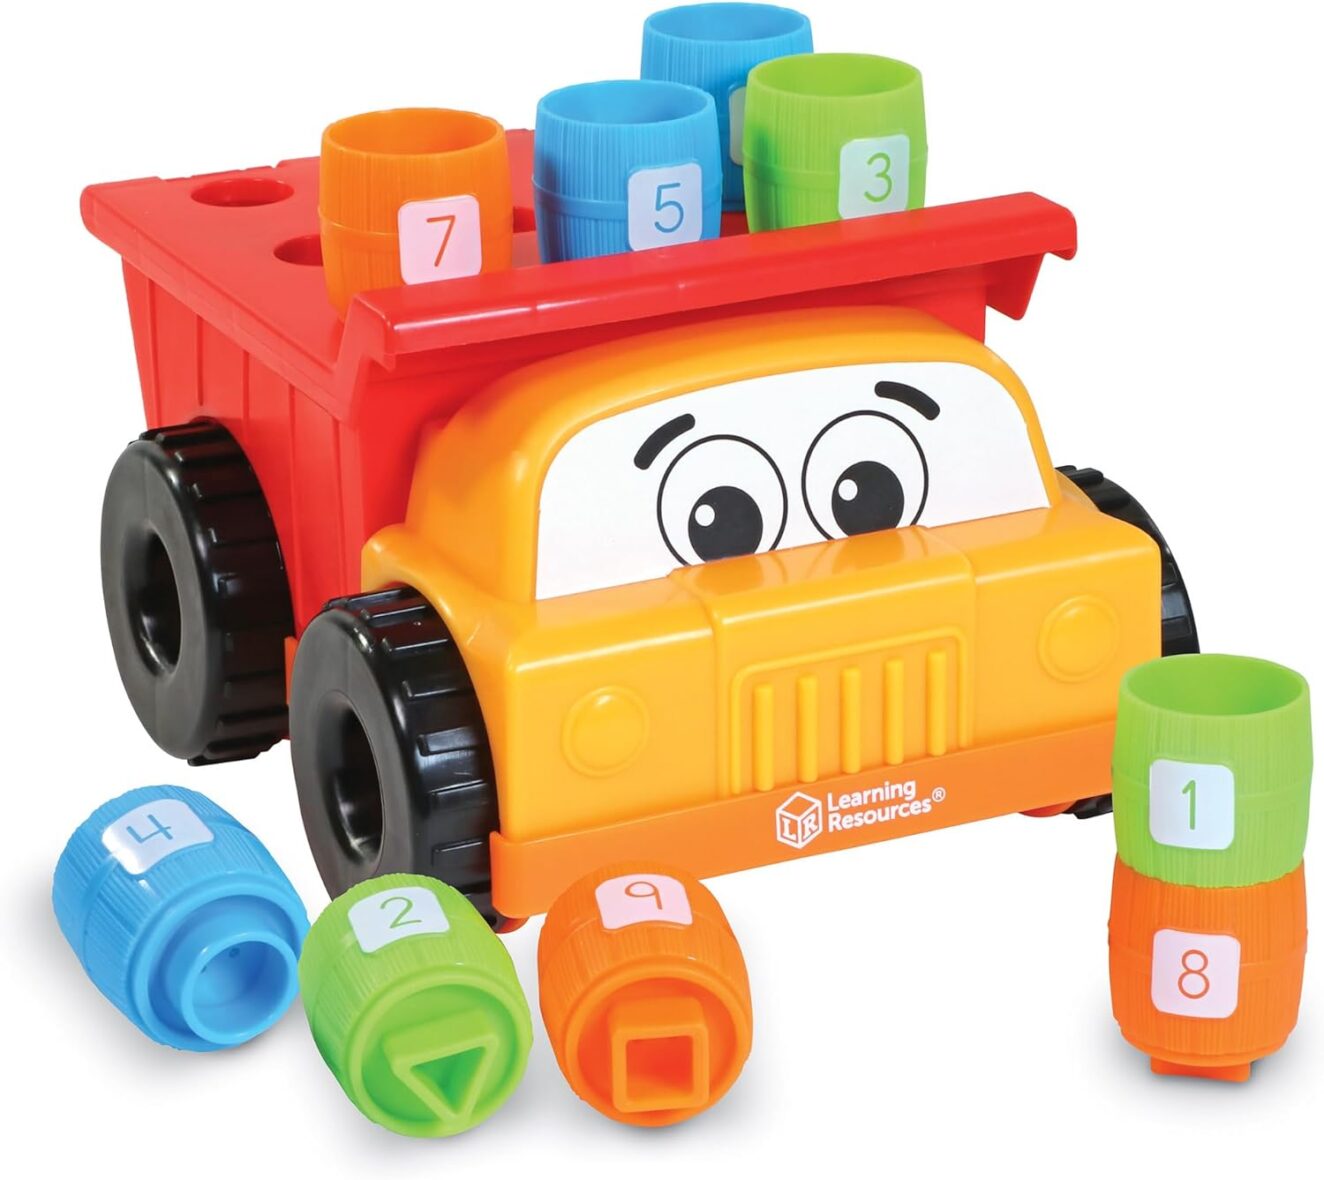 Learning Resources Tony the Peg Stacker Dump Truck – 10 Pieces, Ages 18+ months Fine Motor Skills Toy for Toddlers, Preschool Toys